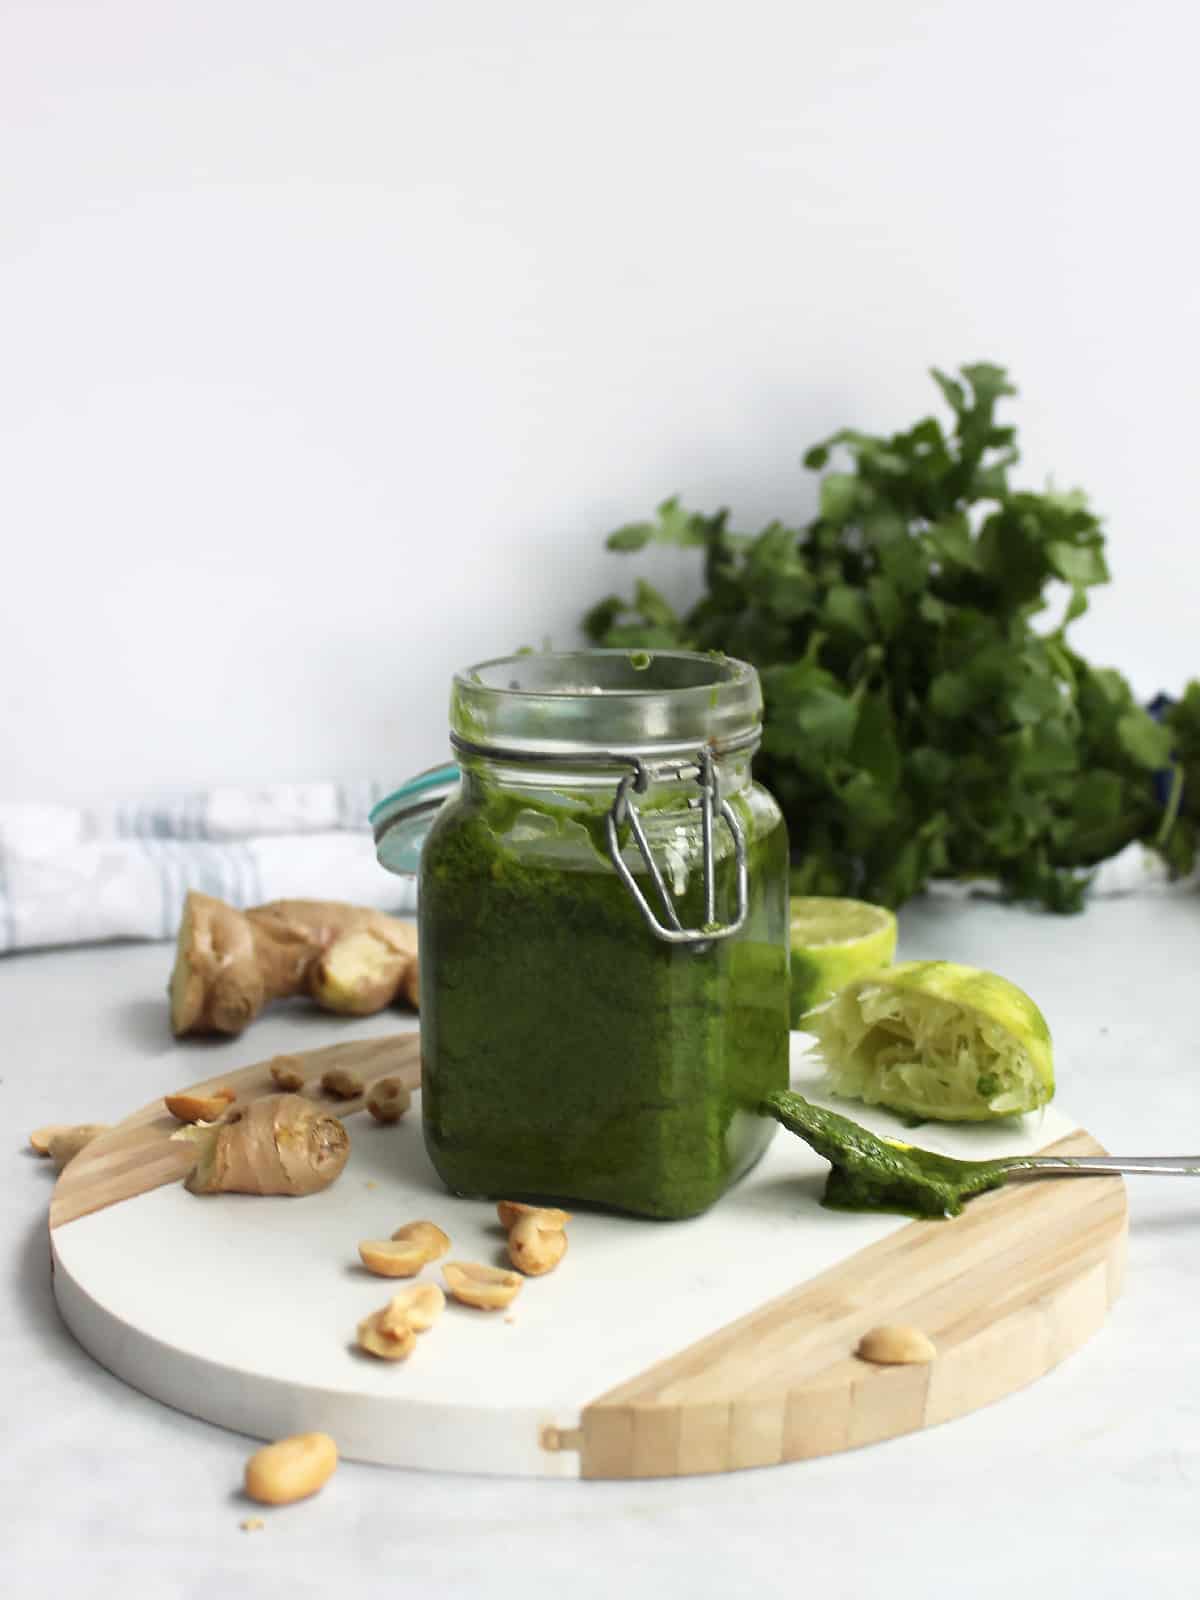 A jar of pesto on a wooden chopping board surrounded by the ingredients used to make it.